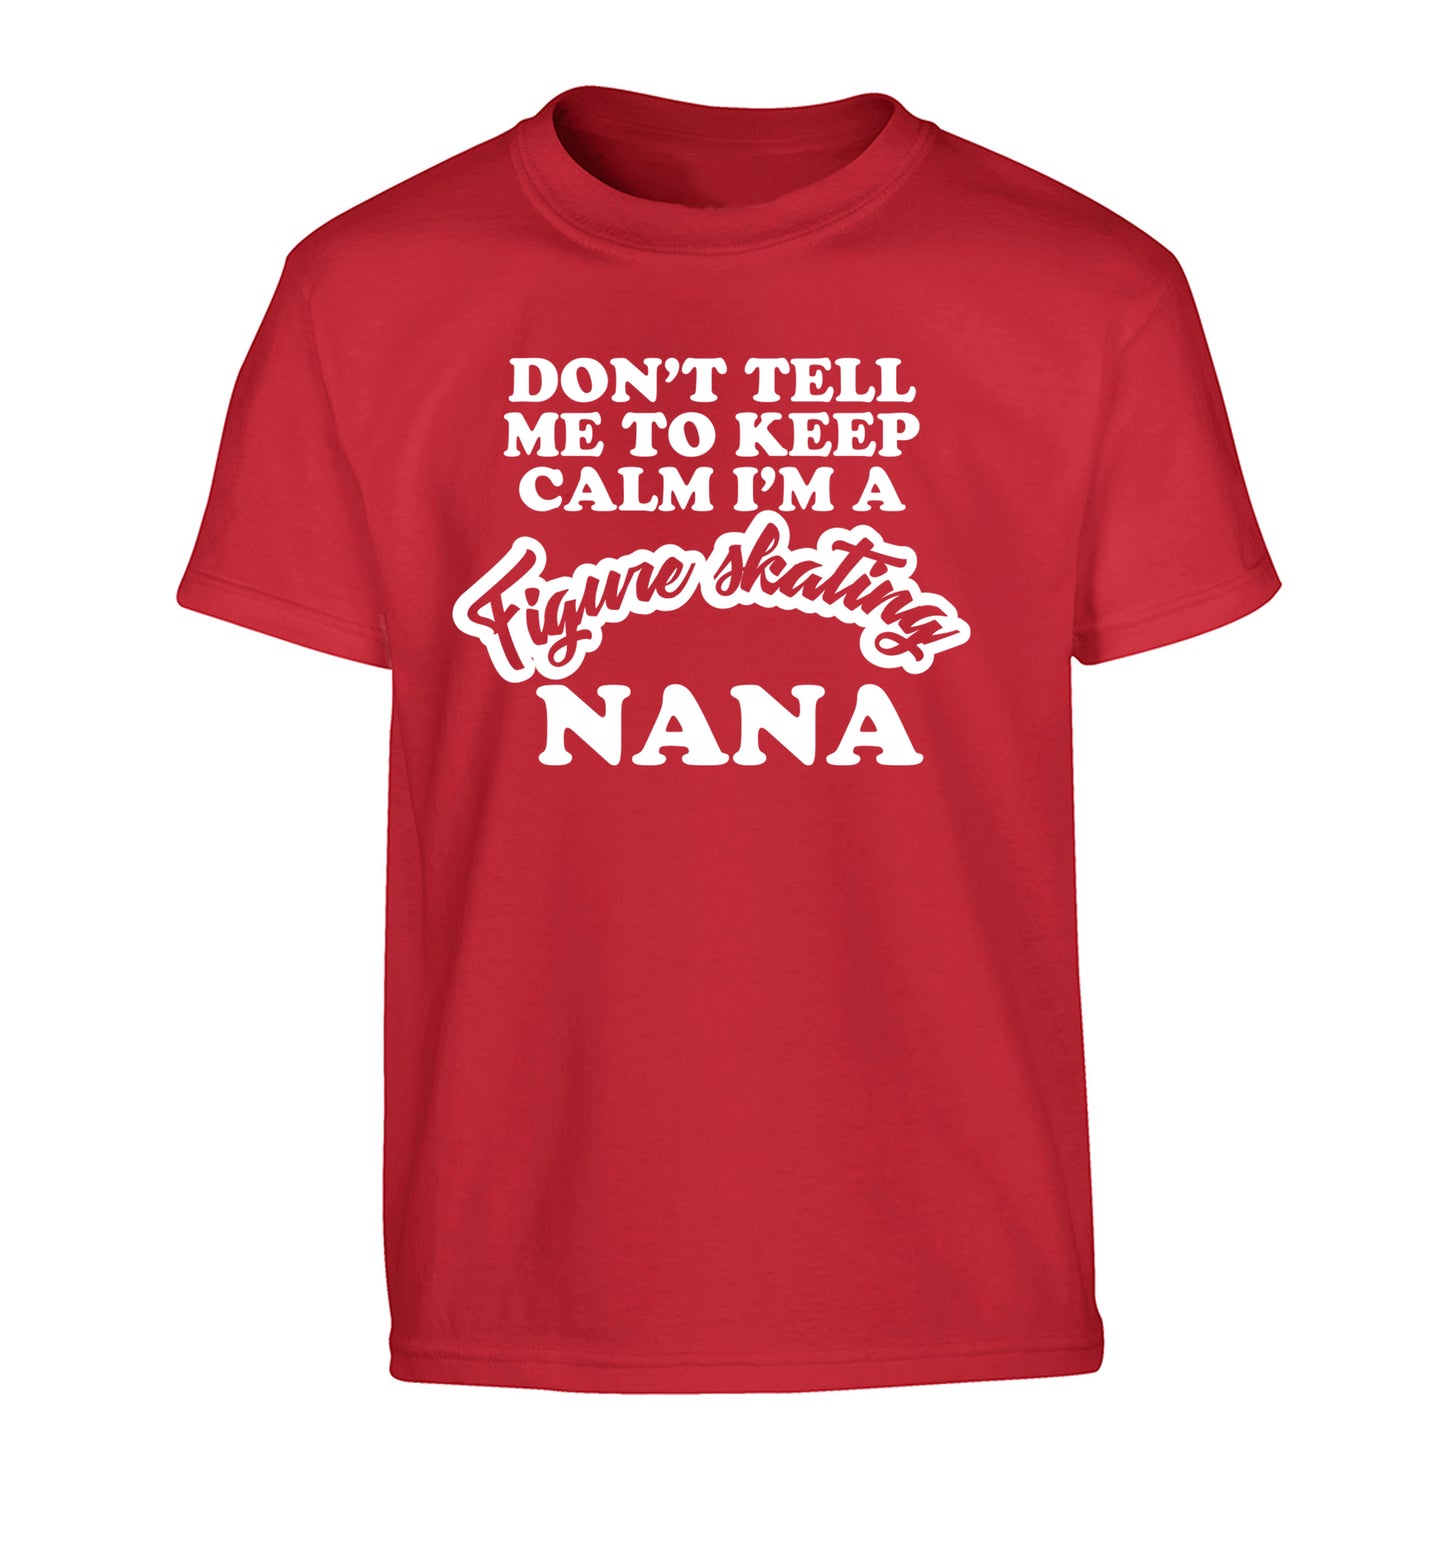 Don't tell me to keep calm I'm a figure skating nana Children's red Tshirt 12-14 Years